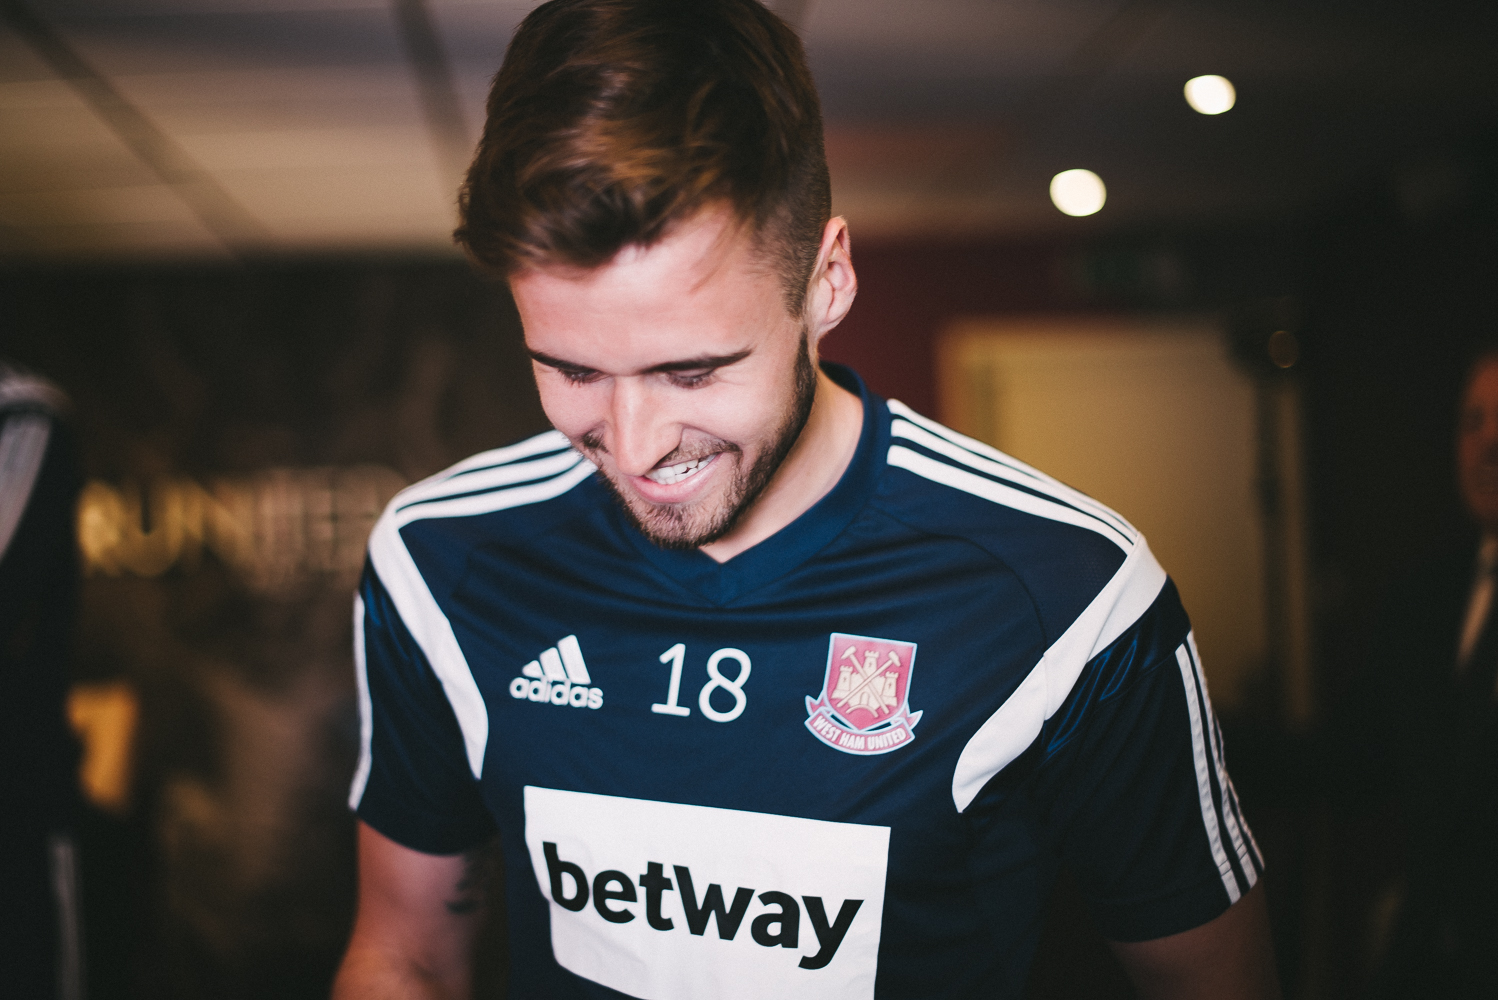 Betway_WestHam_Alex_Wallace_Photography_0151.jpg